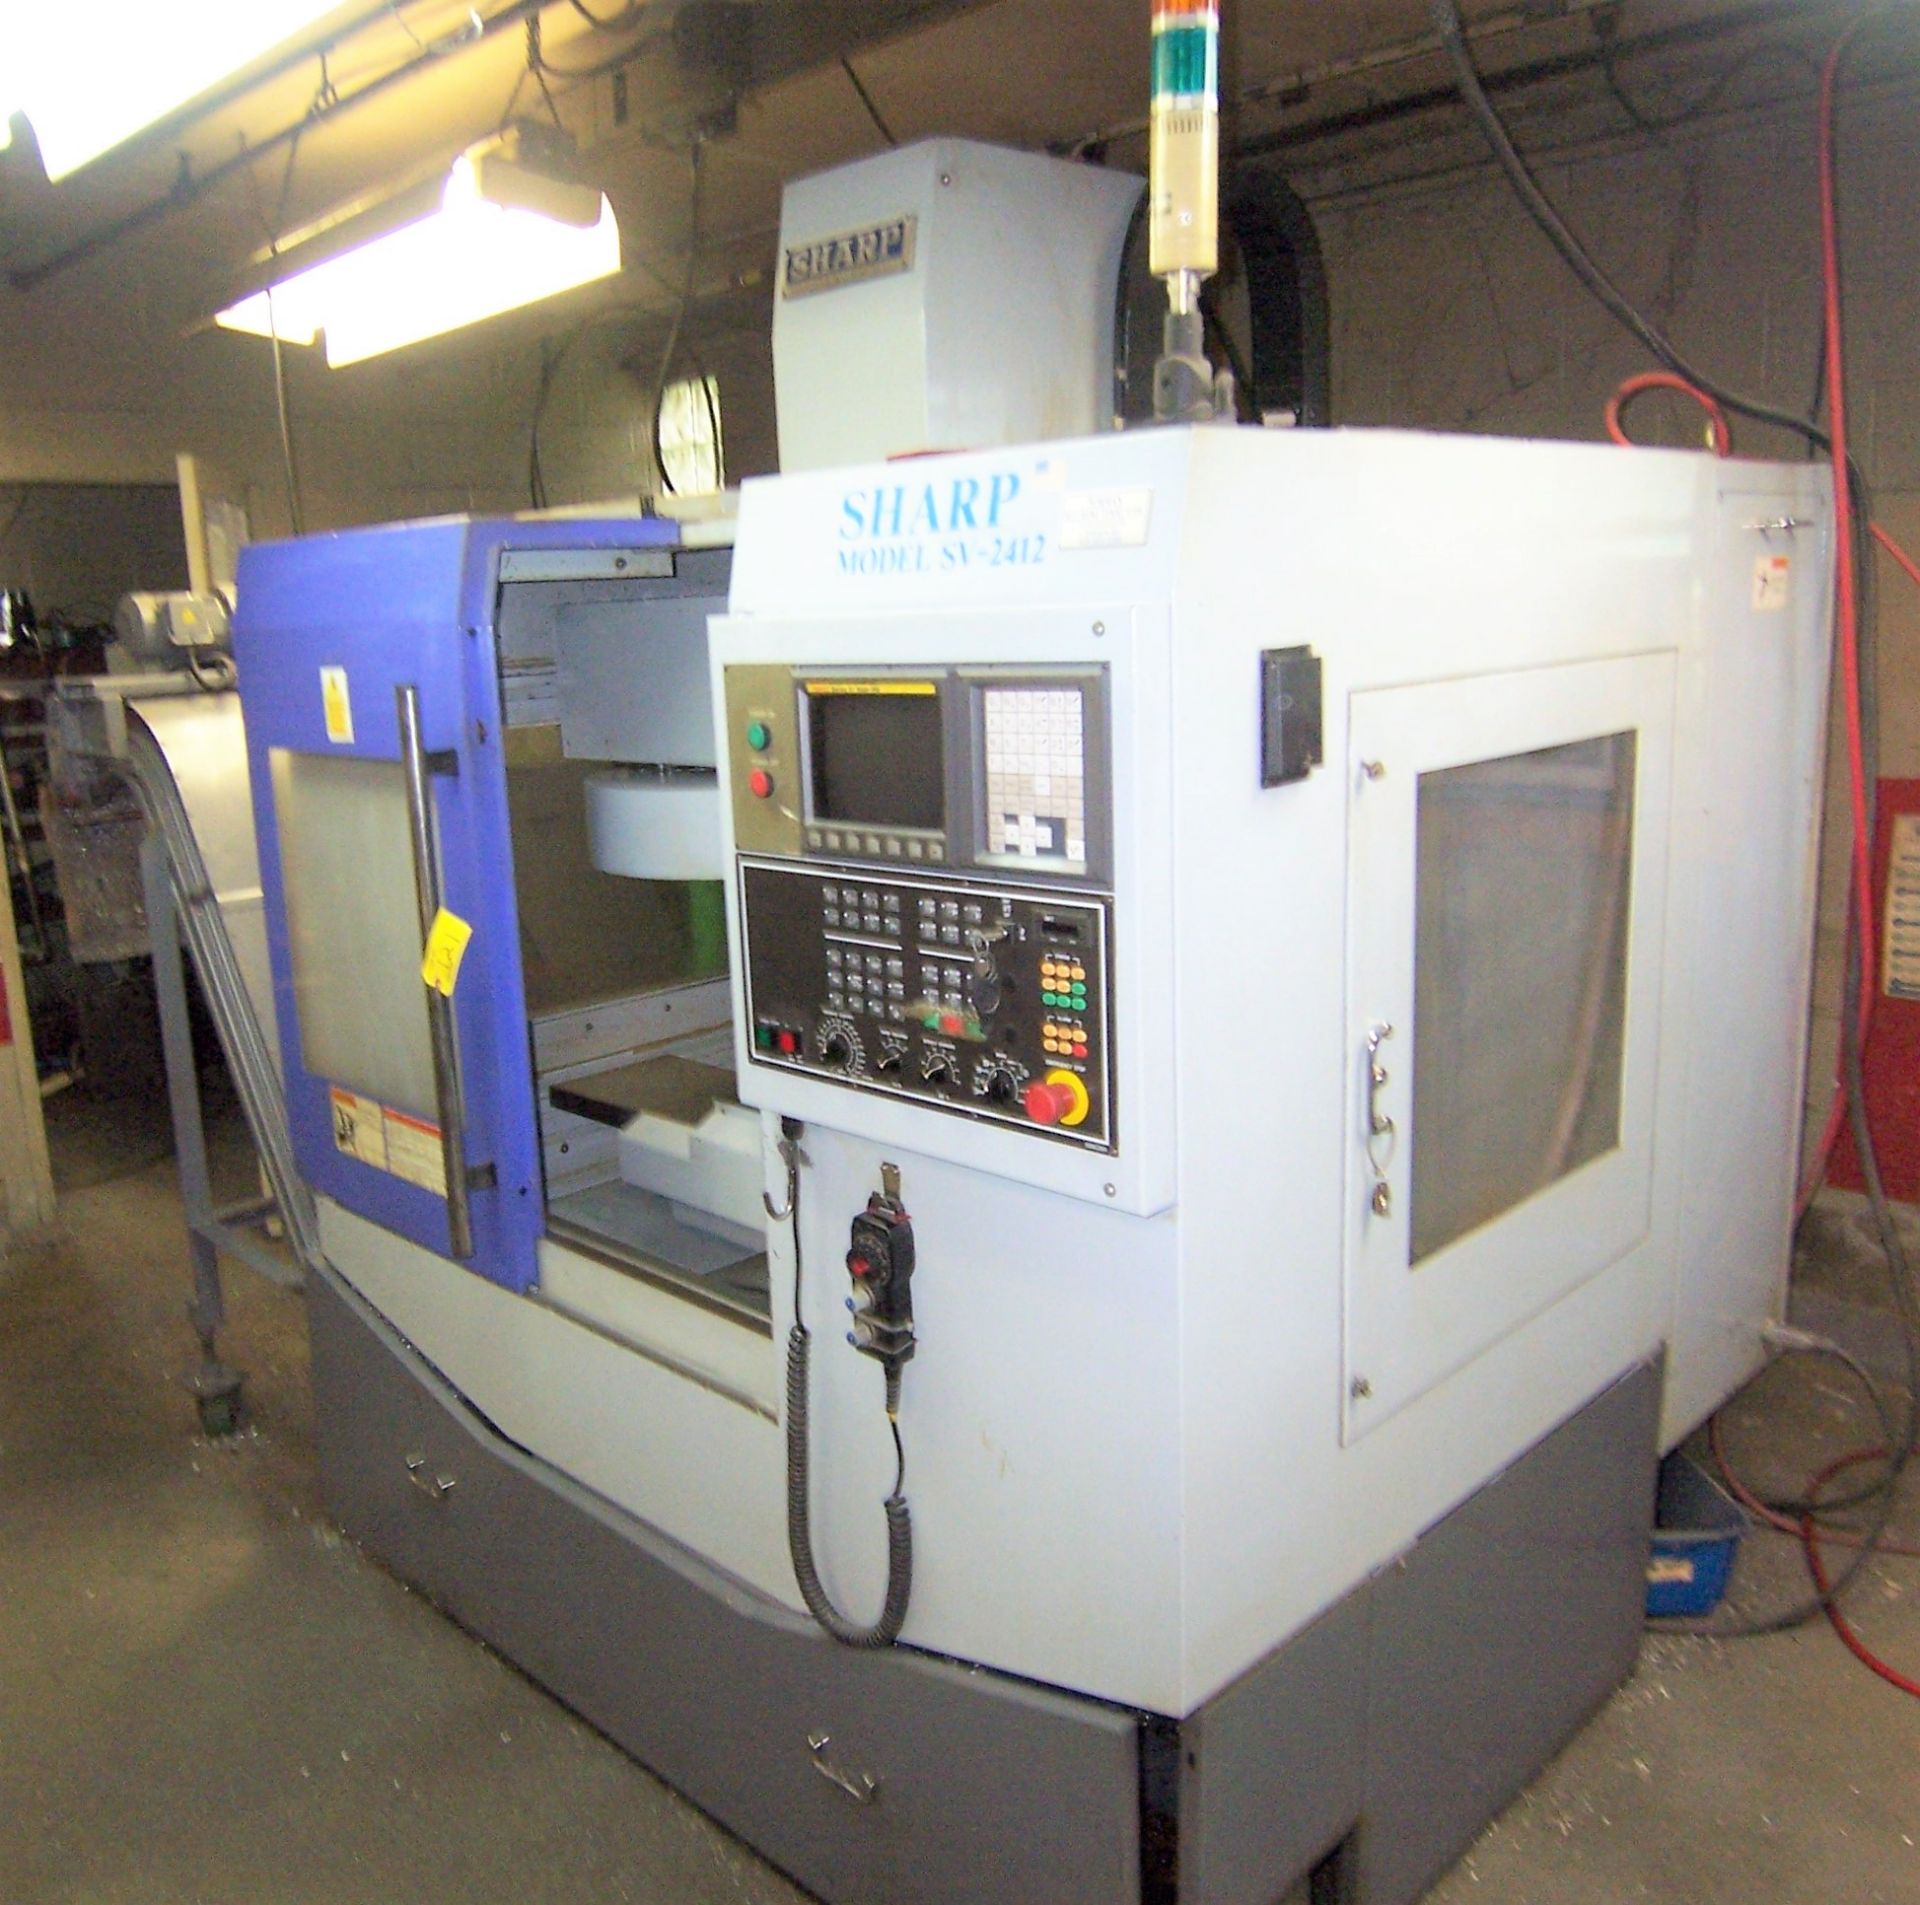 SHARP MDL. SV24125 CNC VERTICAL MACHINING CENTER WITH 16-POSITION AUTOMATIC TOOL CHANGER, 12" X 27- - Image 2 of 5